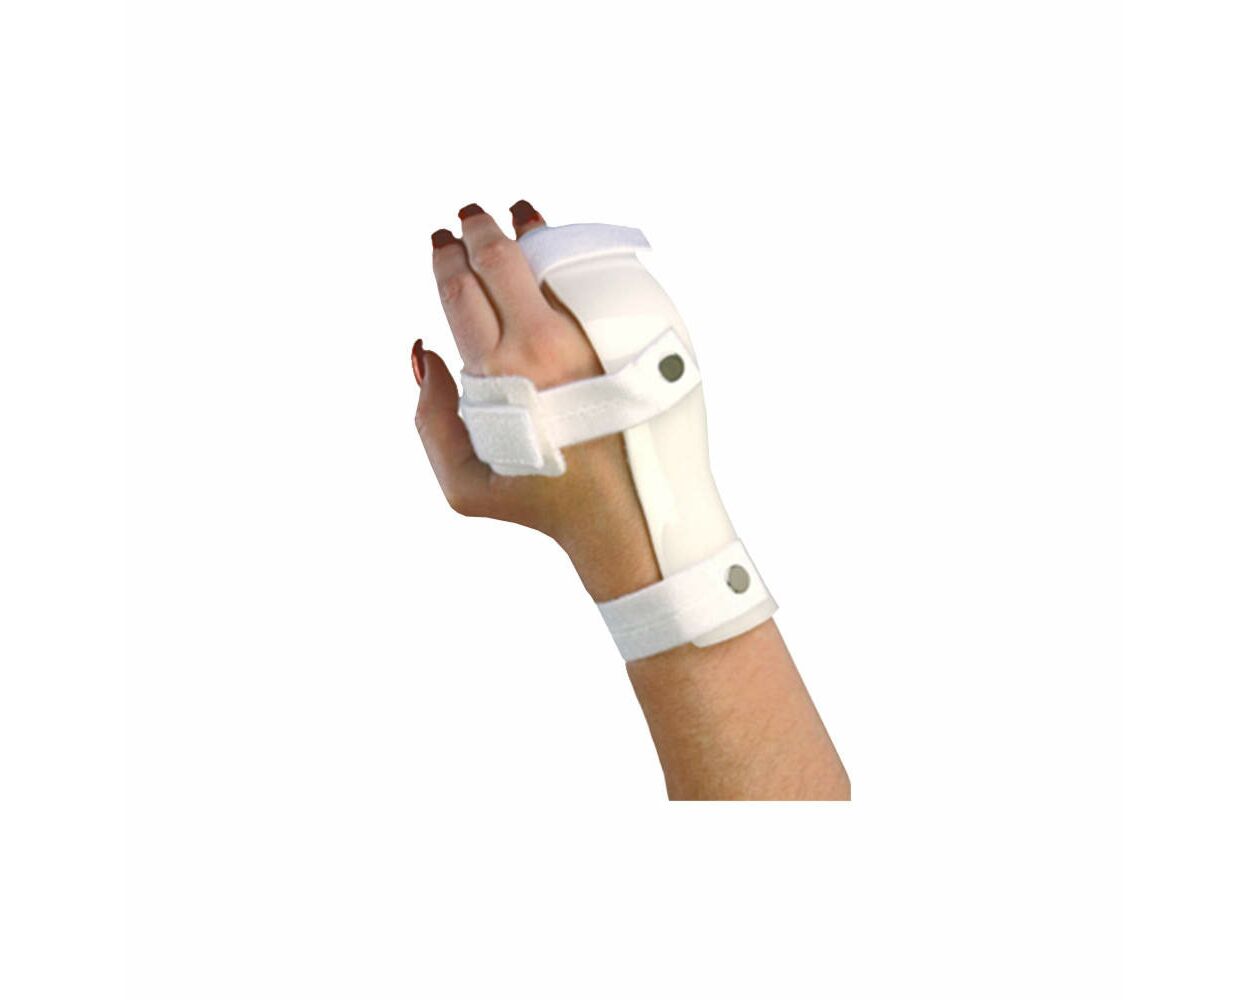 Finger Splints Products, Supplies and Equipment